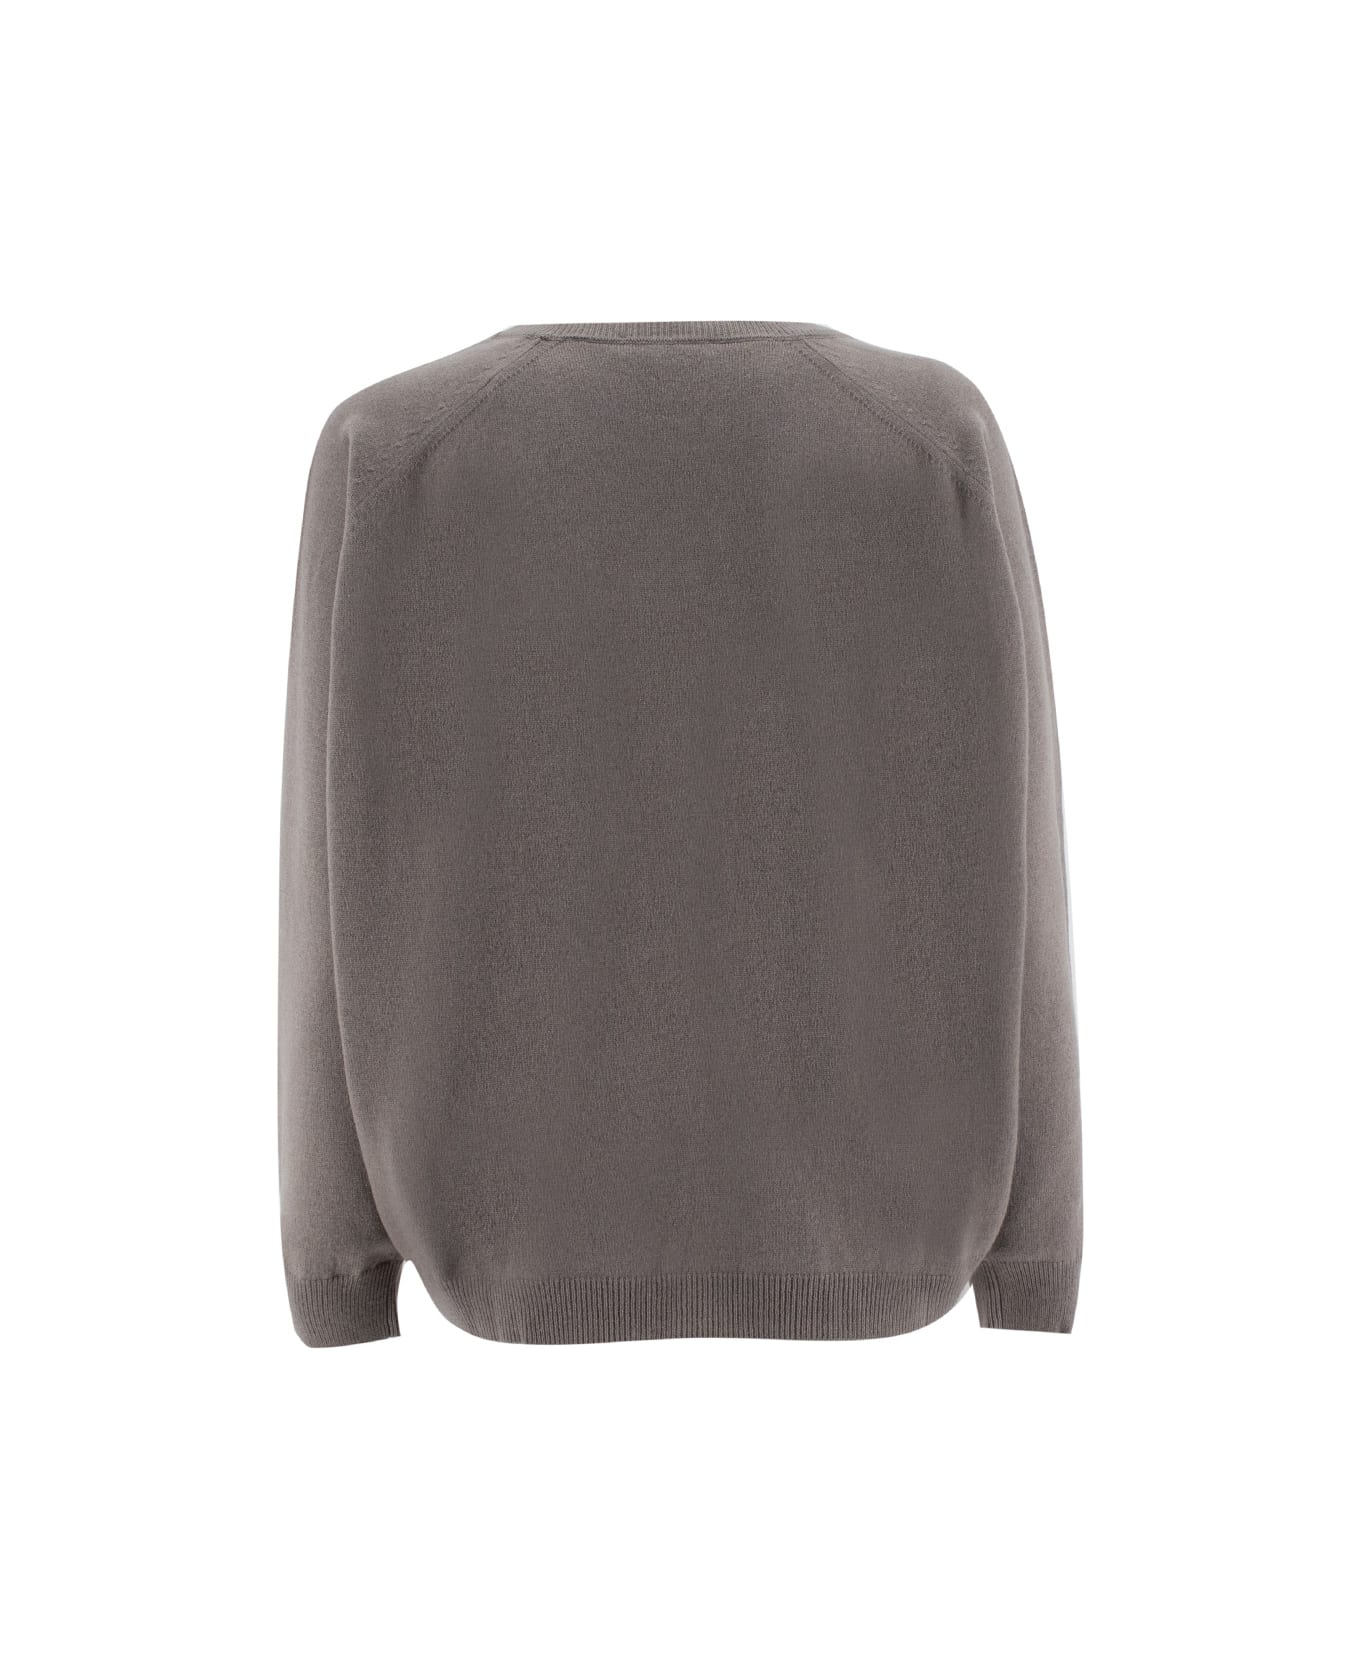 Le Tricot Perugia Sweater - MIDDLE GREY